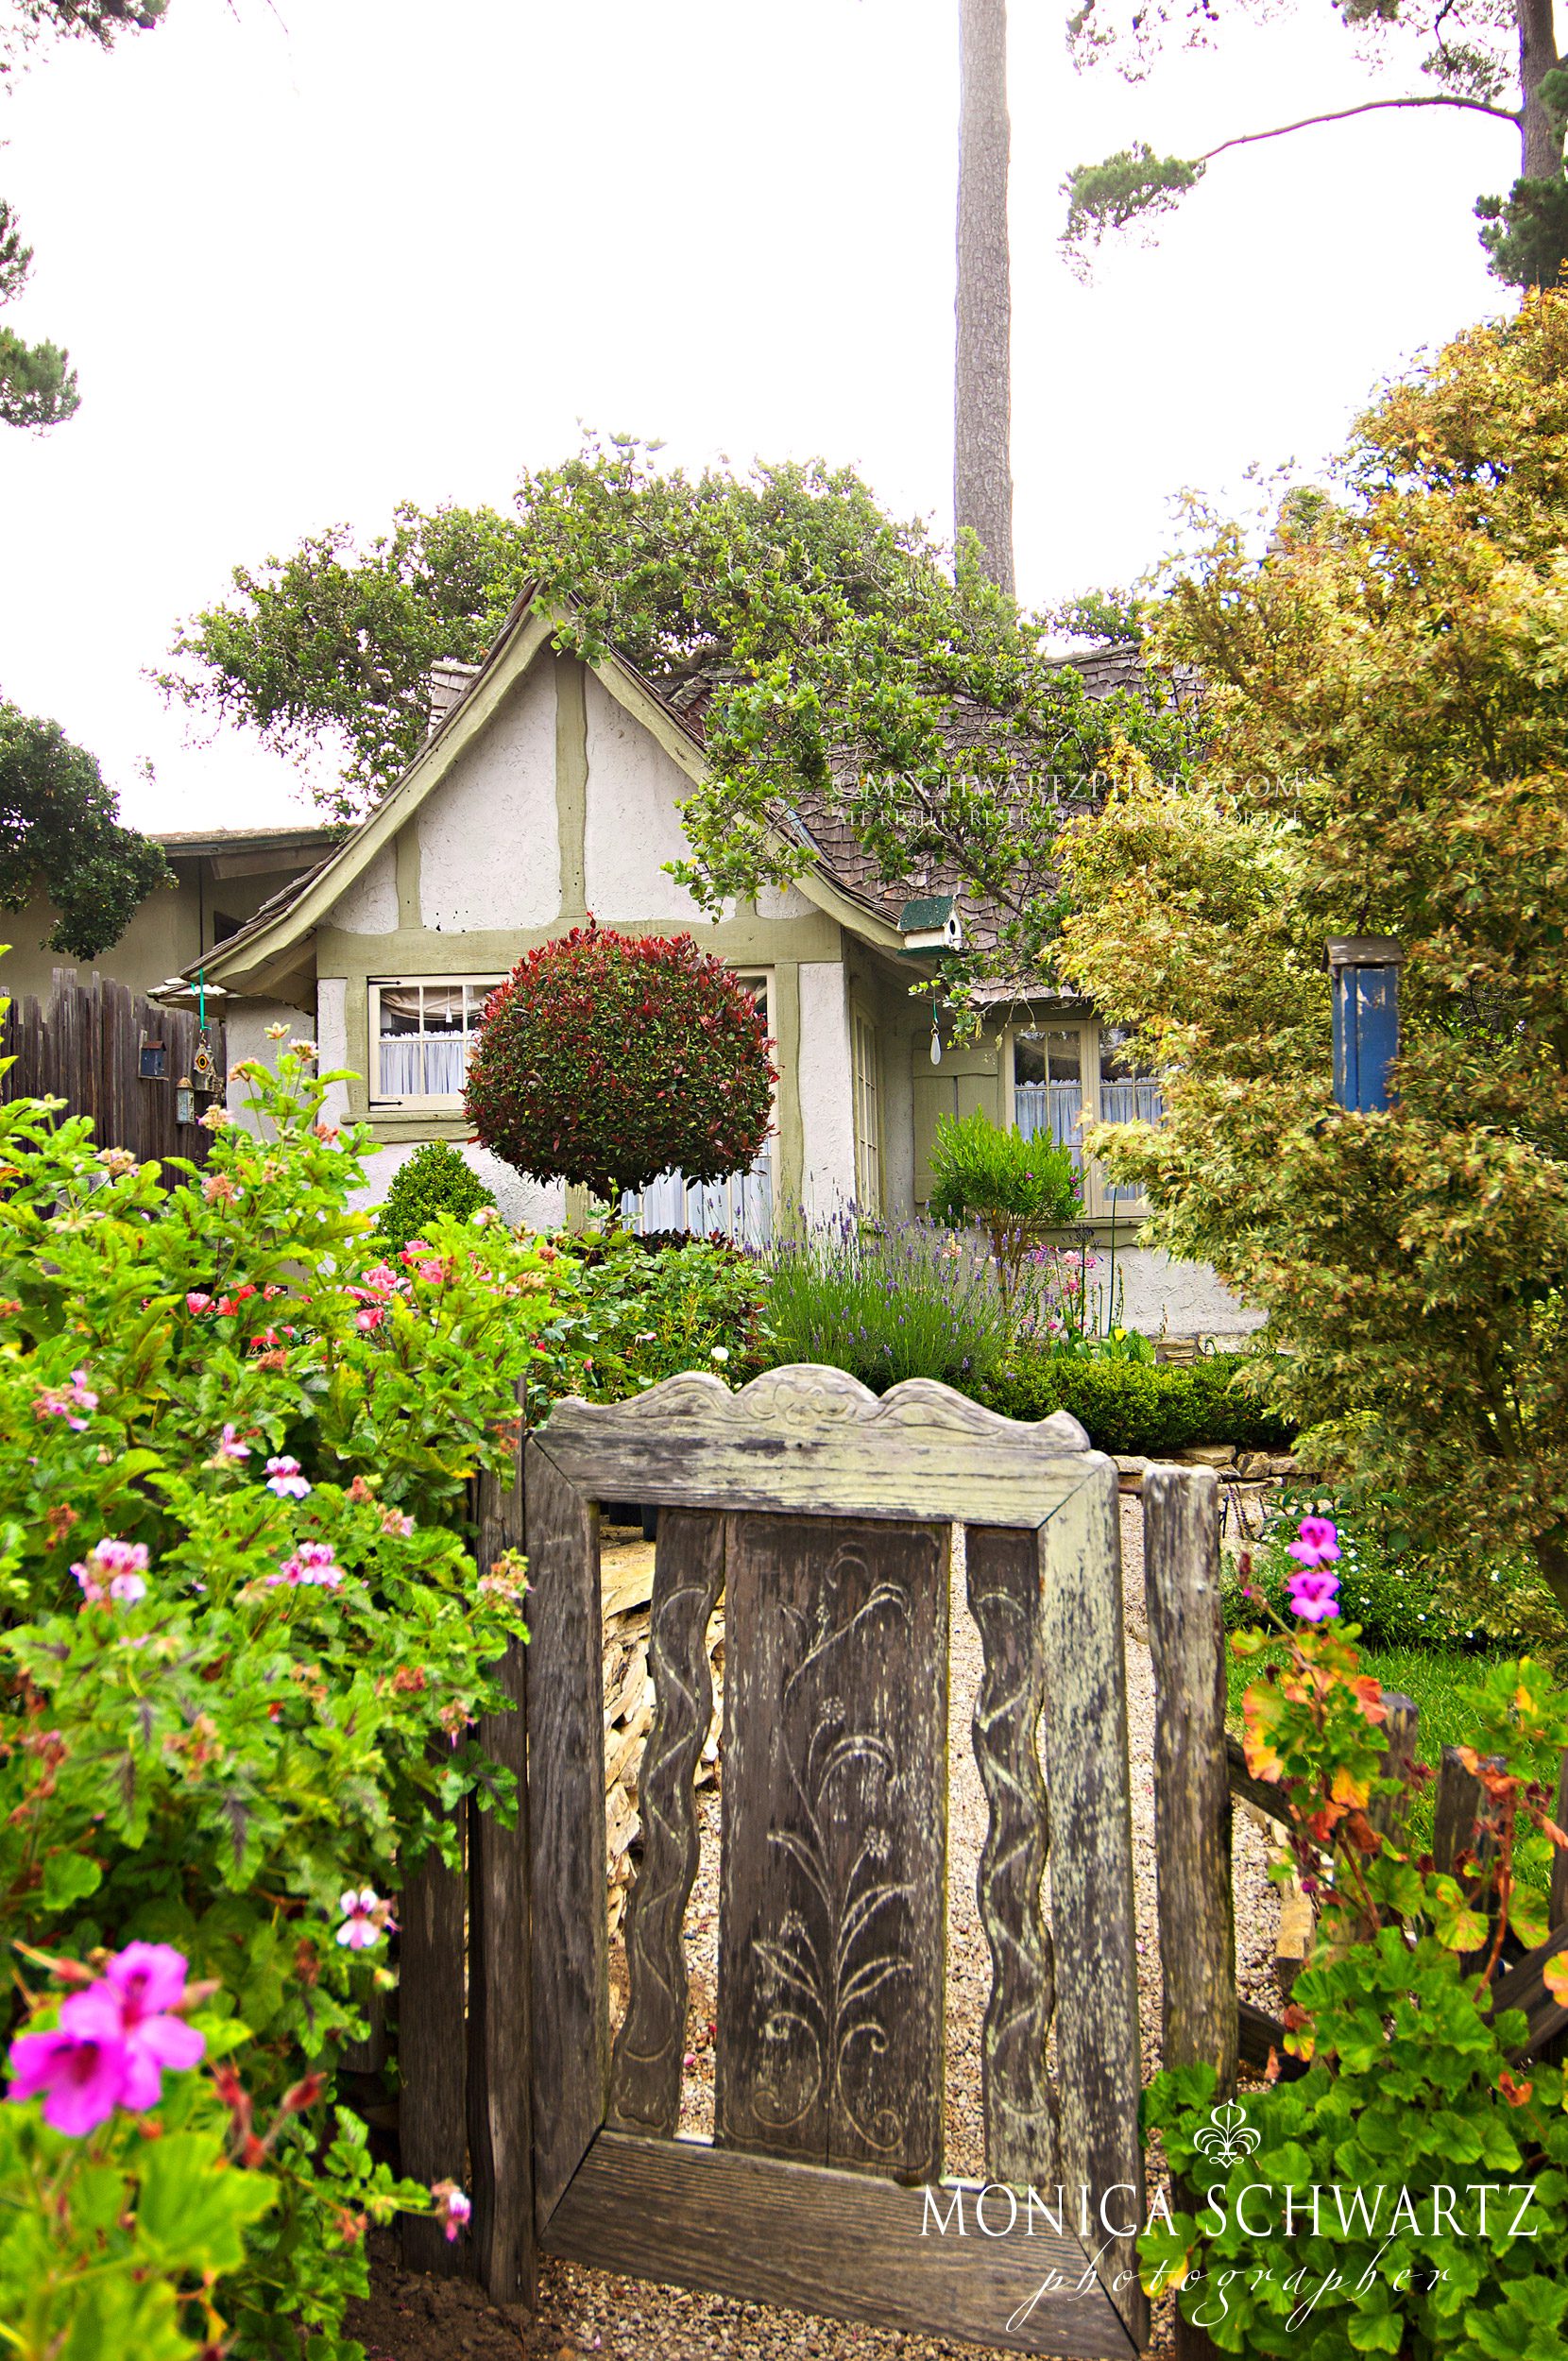 One-of-the-Hansel-and-Gretel-fairy-tale-cottages-in-Carmel-by-the-Sea-California